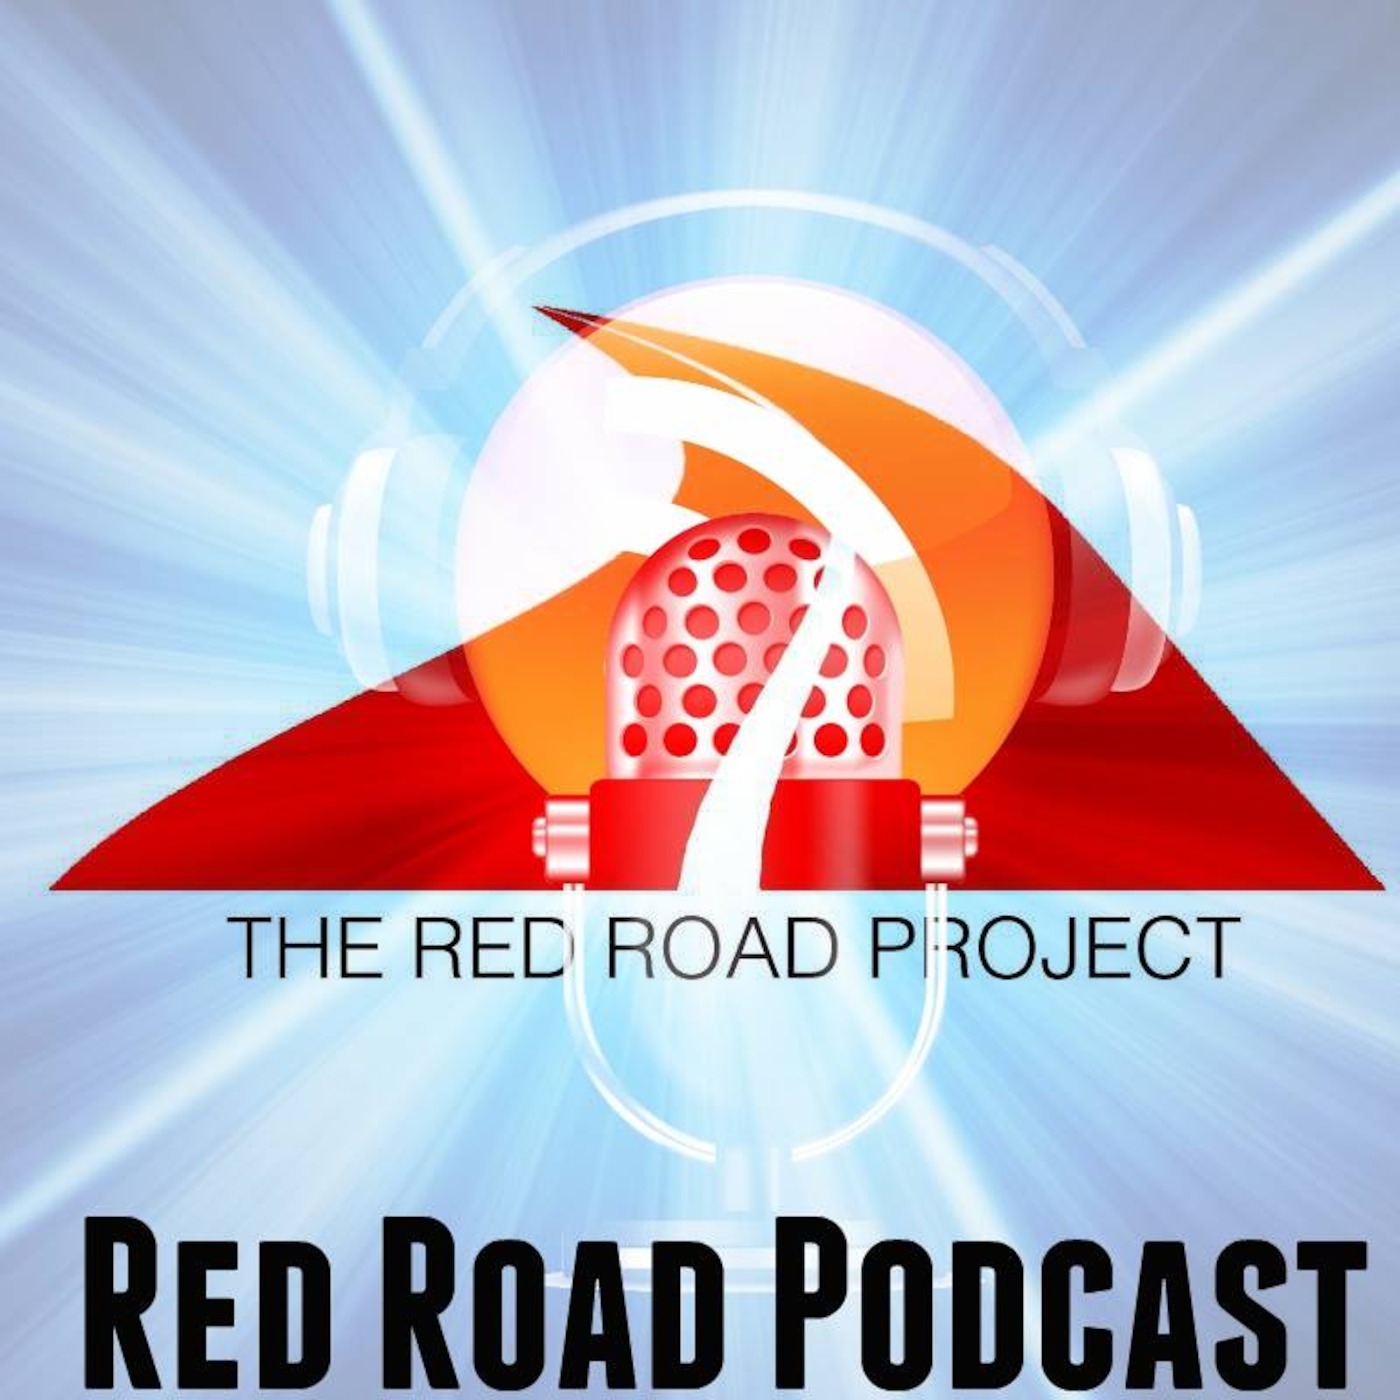 Red Road Podcast